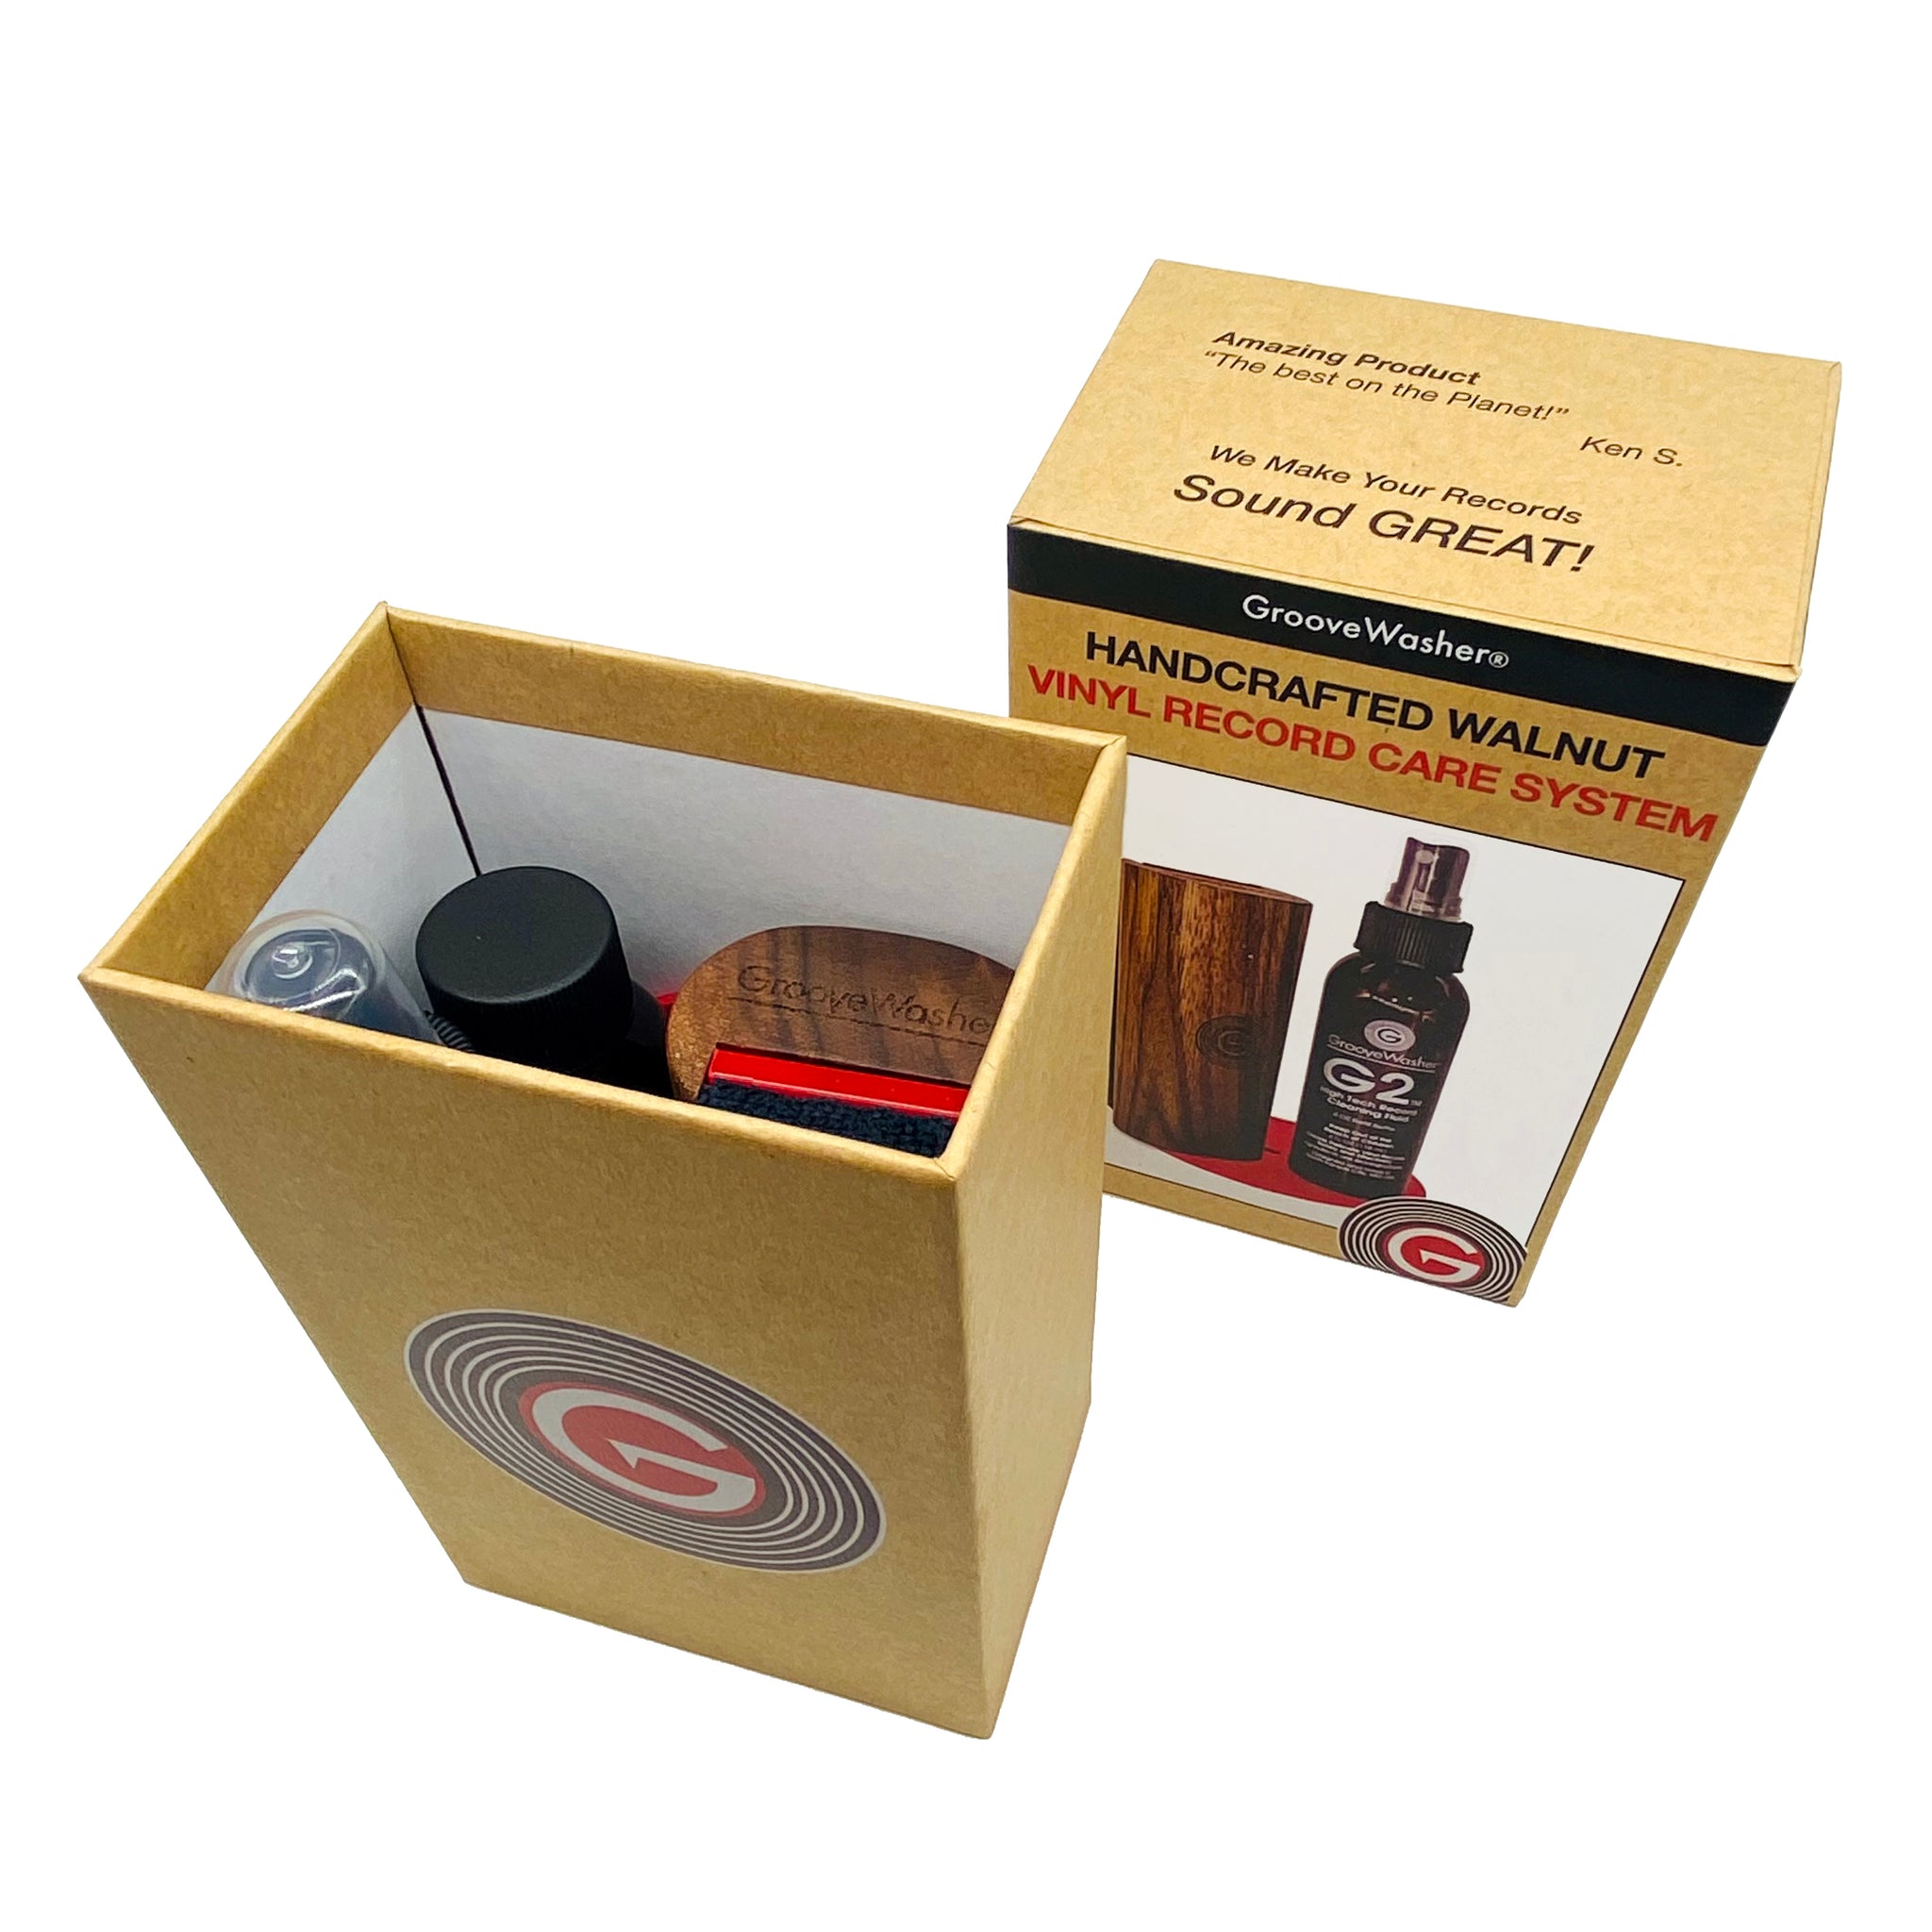 Vinyl Record Cleaner Kit, Best Record Cleaning Solution